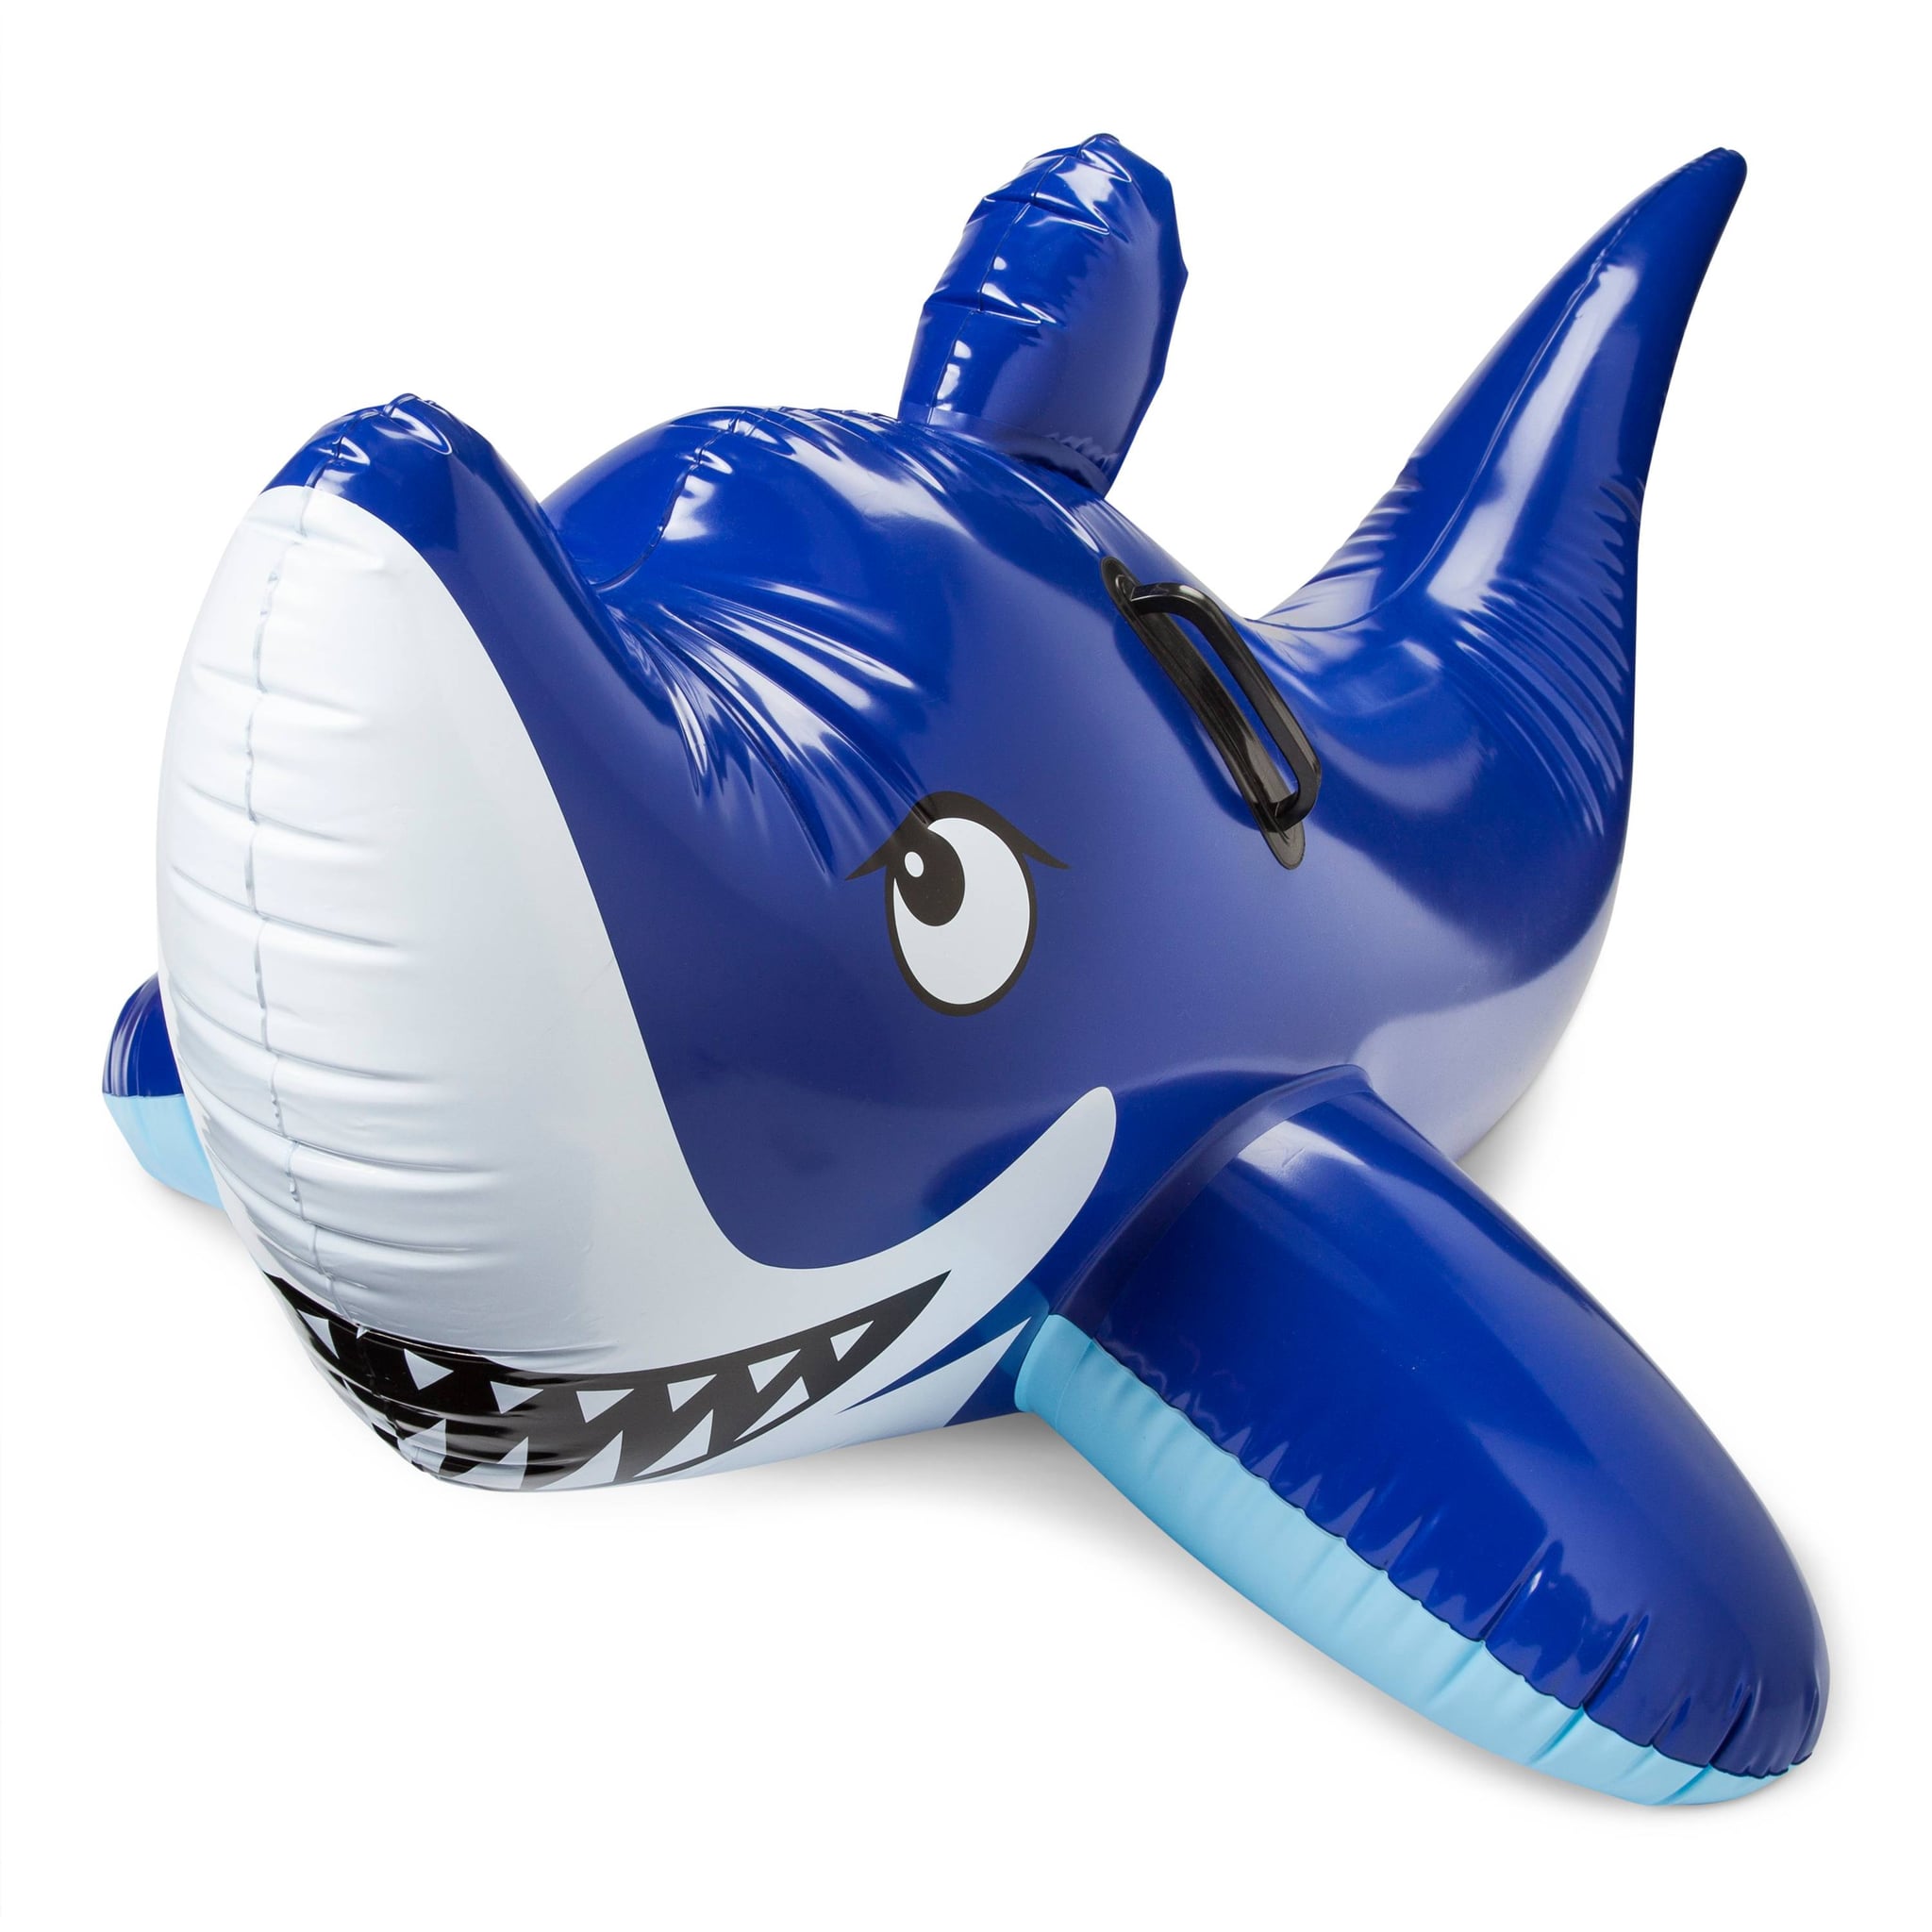 Taimot Inflatable Sharks Toy with Pool Rafts & Inflatable Ride-ons,Inflatable Whale and Three 24 Inch Inflatable Shark for Pool and Party Decorations Inflatable Sharks Toy 